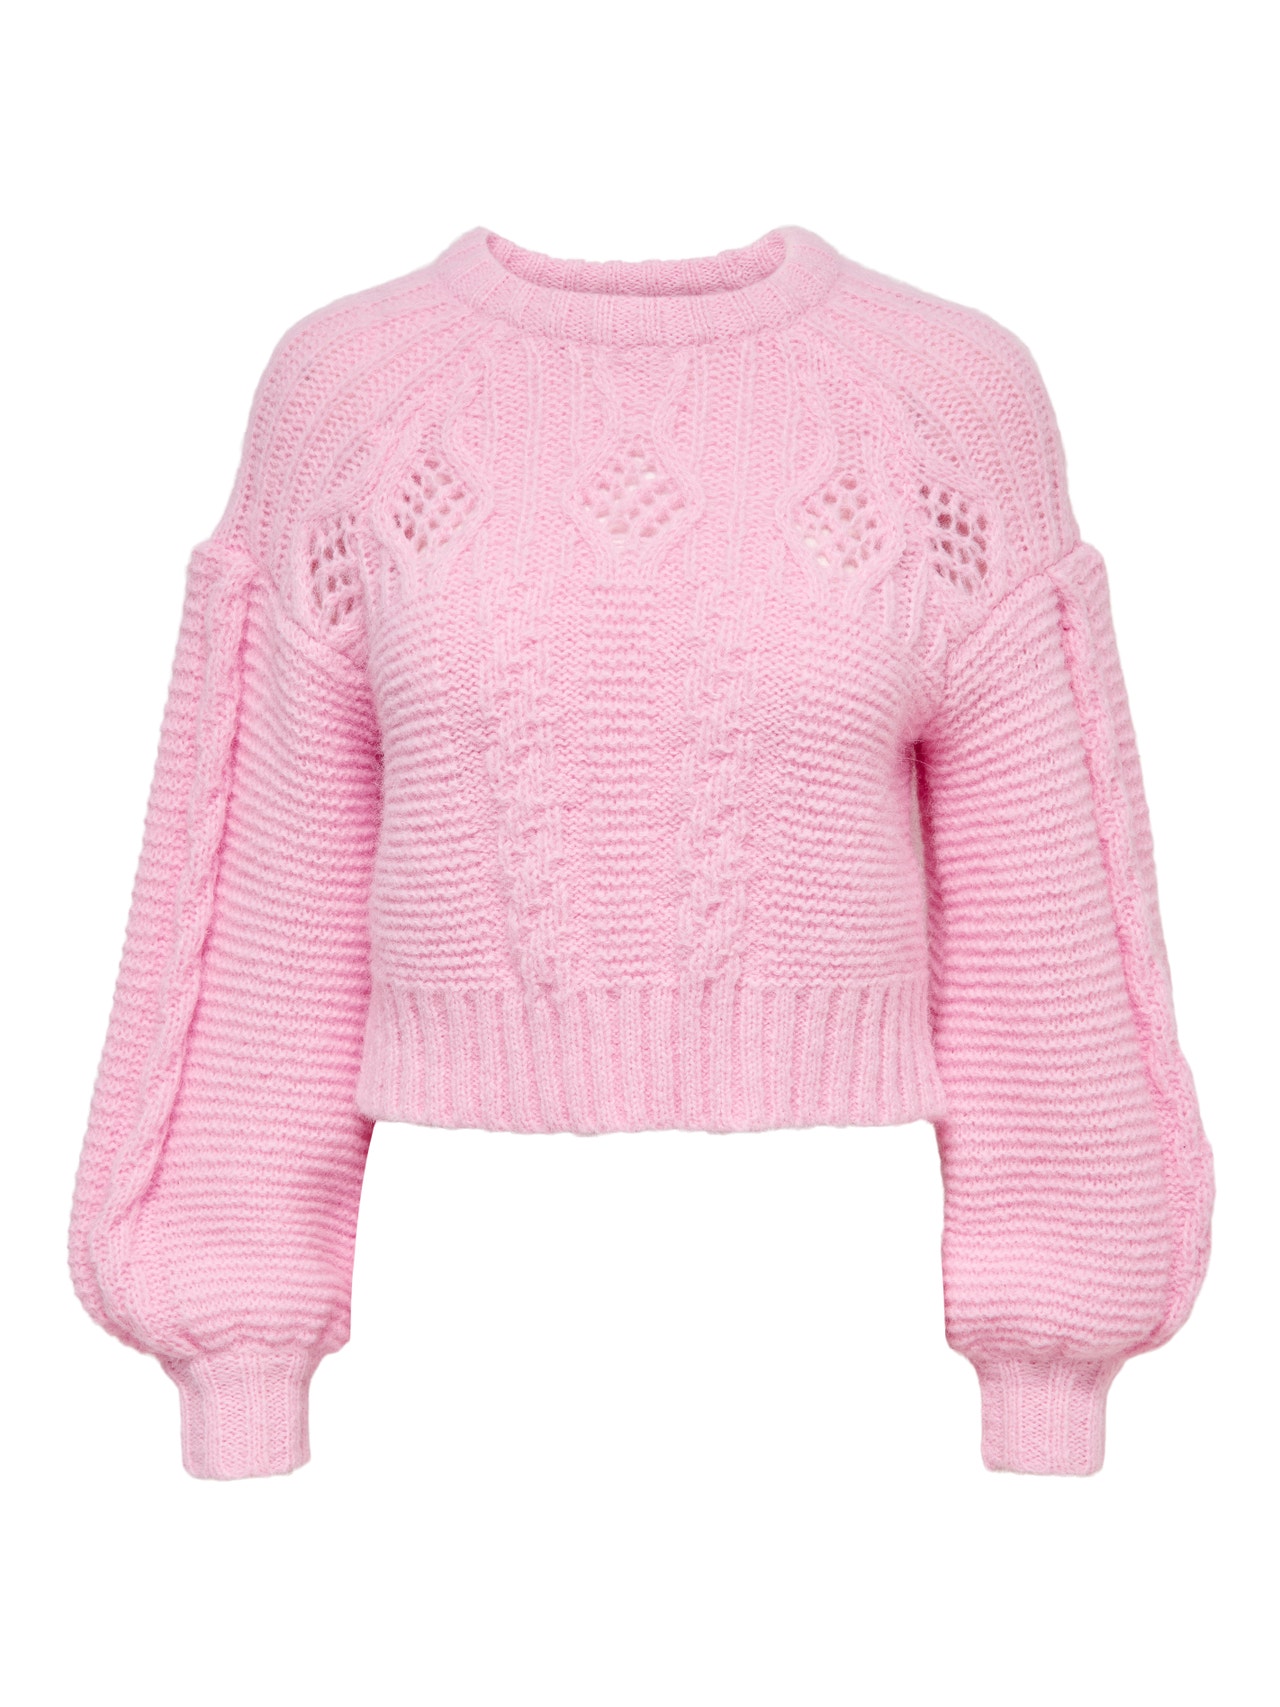 ONLY O-hals Geribde mouwuiteinden Ballonmouwen Pullover -Sweet Lilac - 15267968